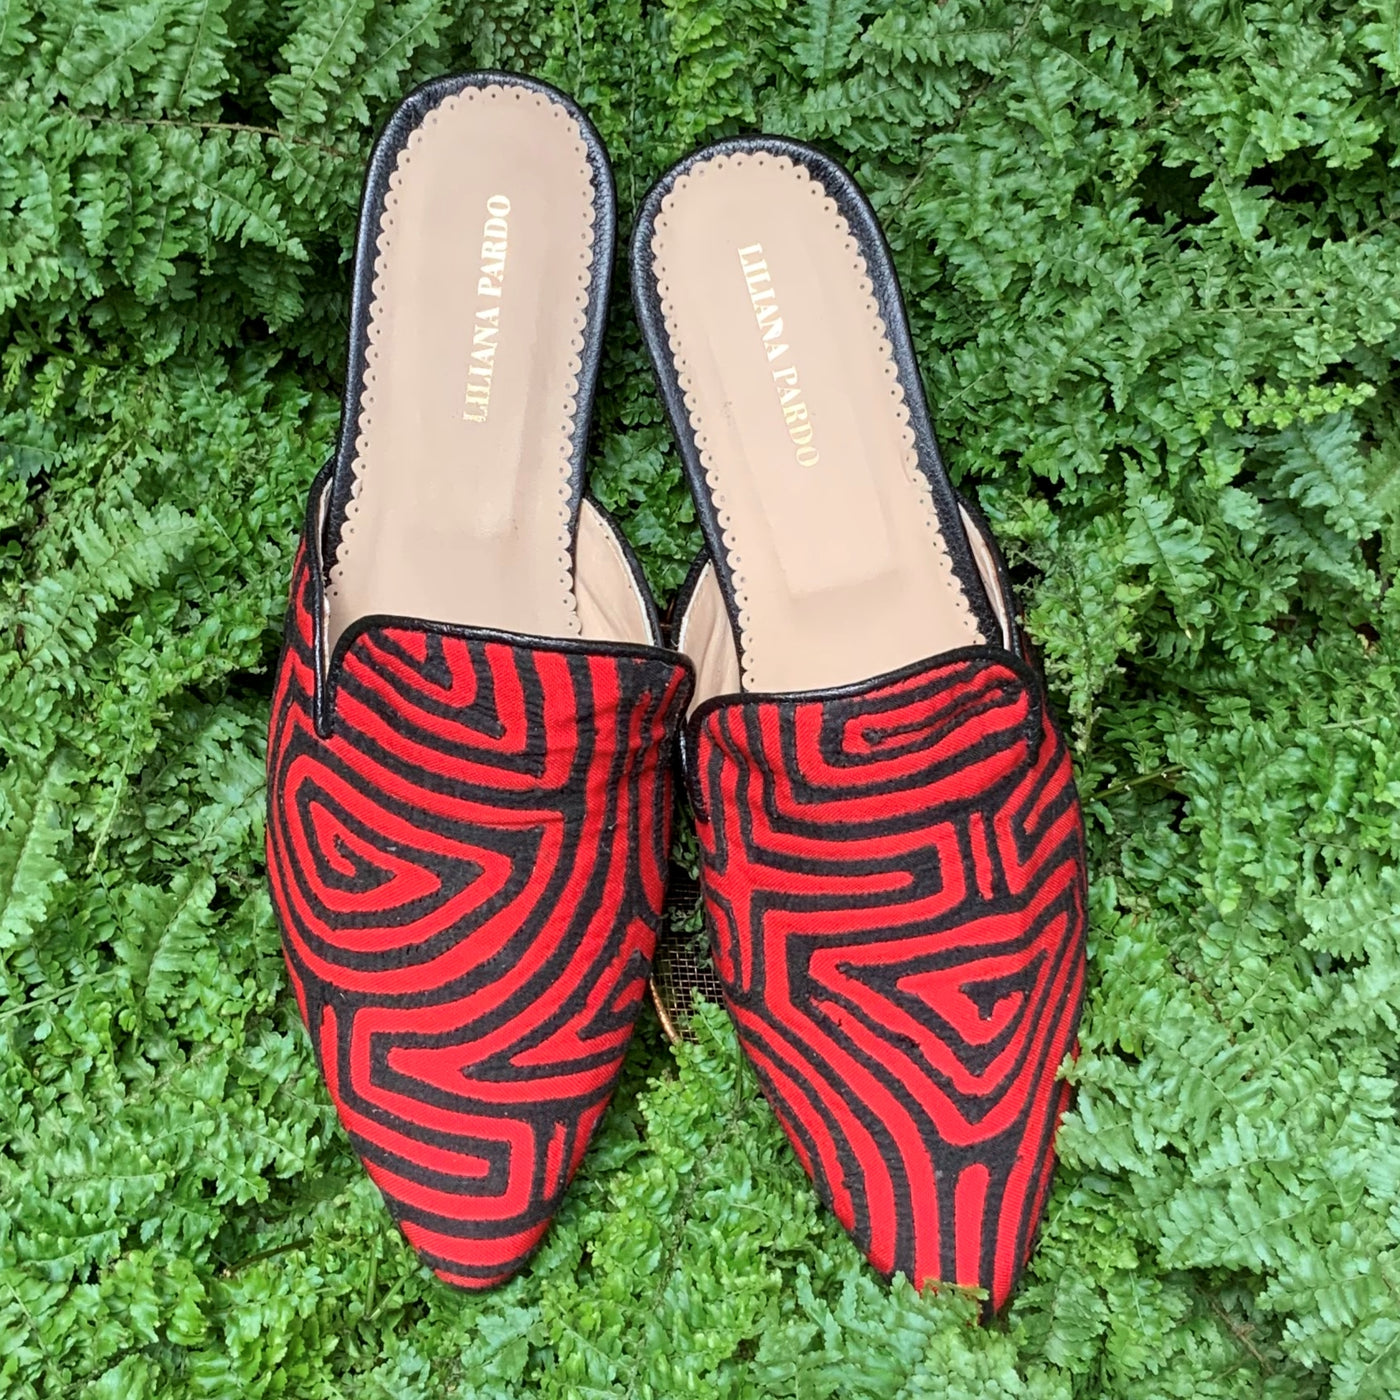 Mola Mules Black & Red Size 39 Flat